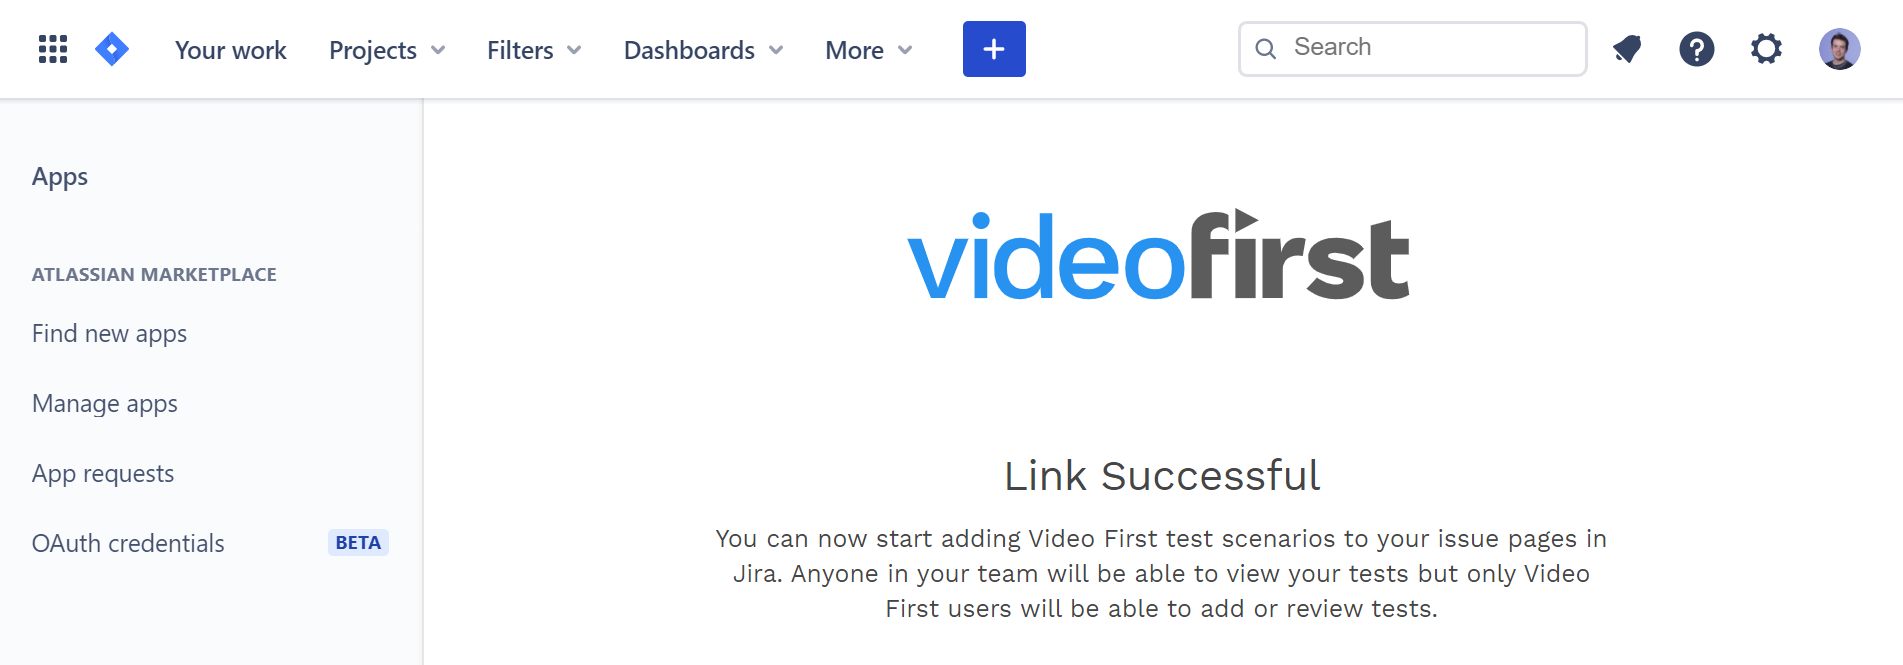 Video first for jira 6